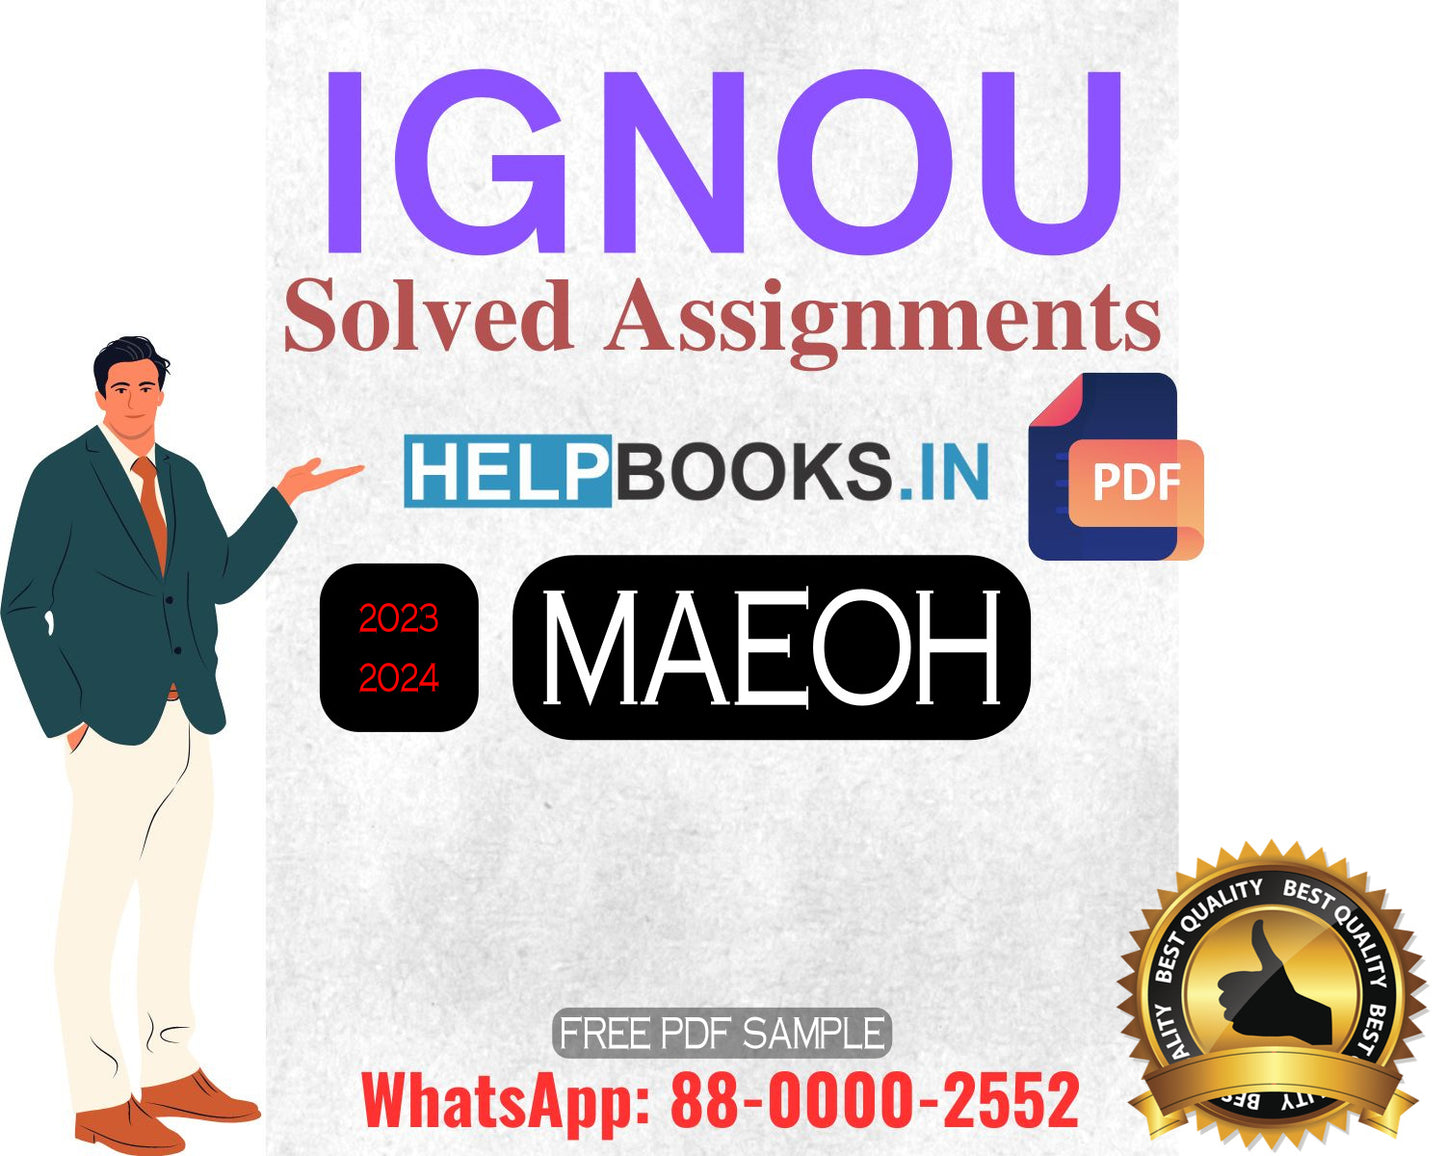 IGNOU Master's Degree Programme Latest IGNOU Solved Assignment 2023-24 & 2022-23 Sessions : MAEOH Master of Arts Environmental and Occupational Health Solved Assignments